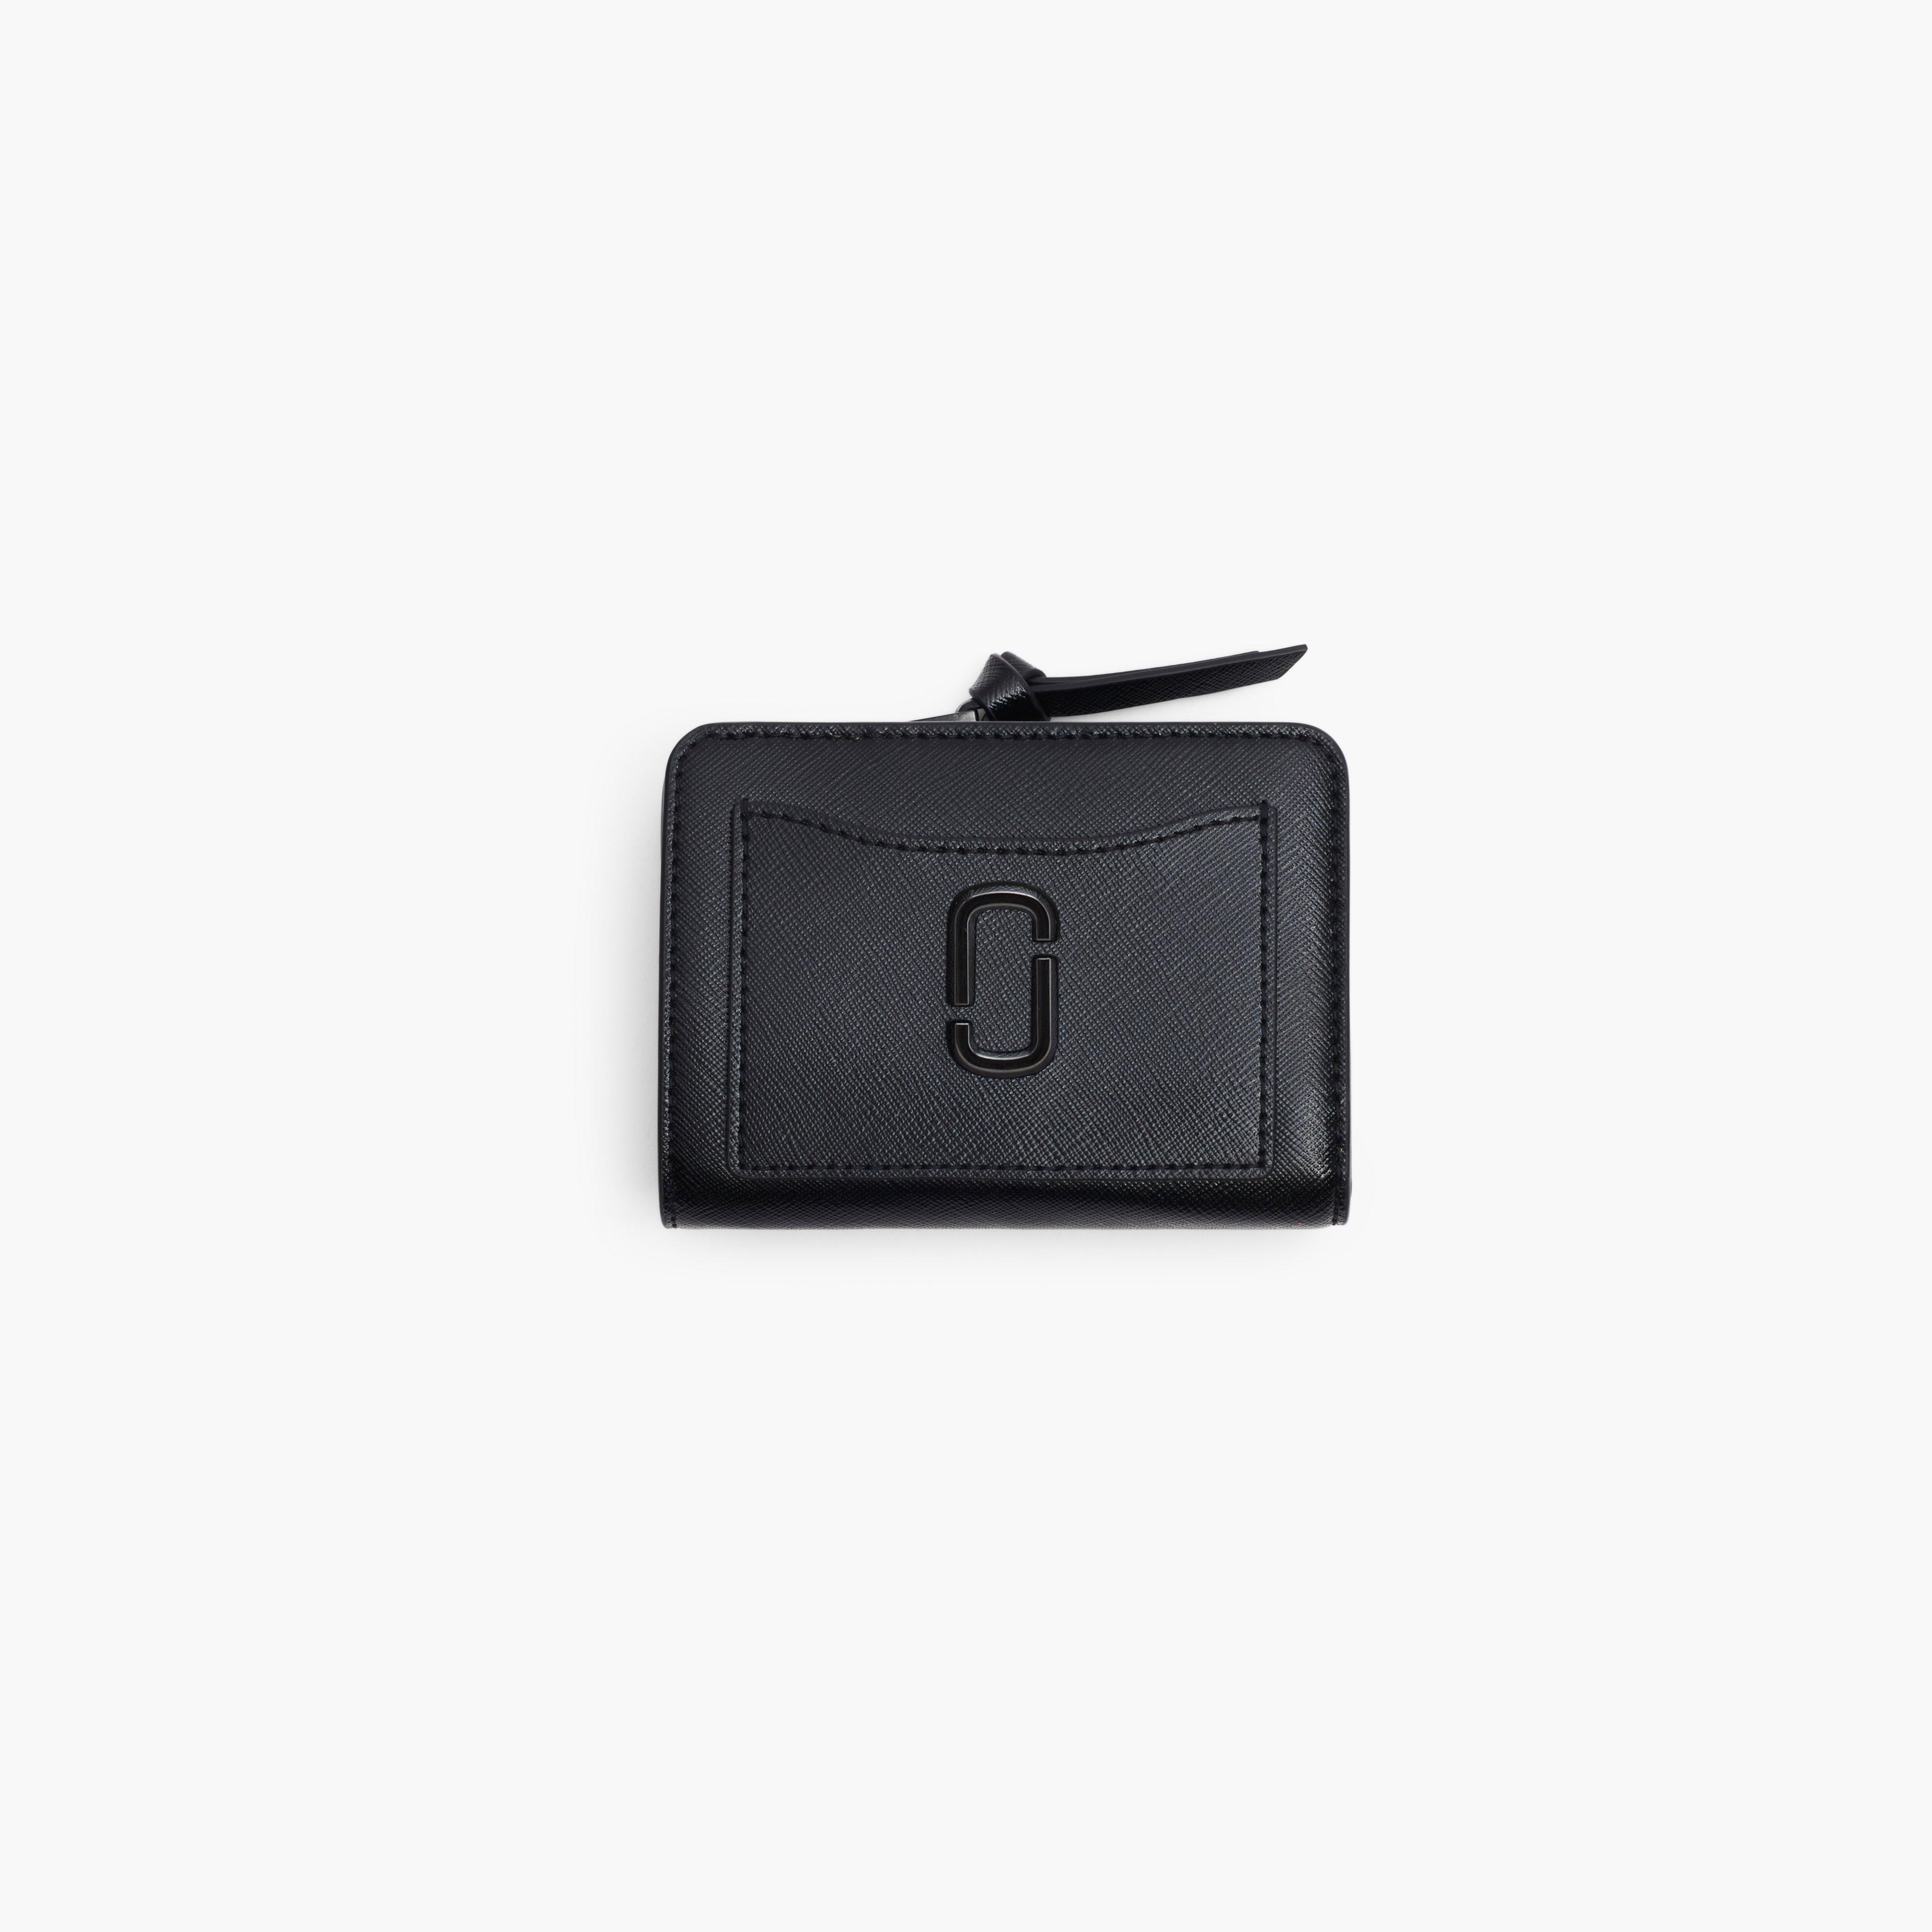 THE UTILITY SNAPSHOT DTM MINI COMPACT WALLET - 1